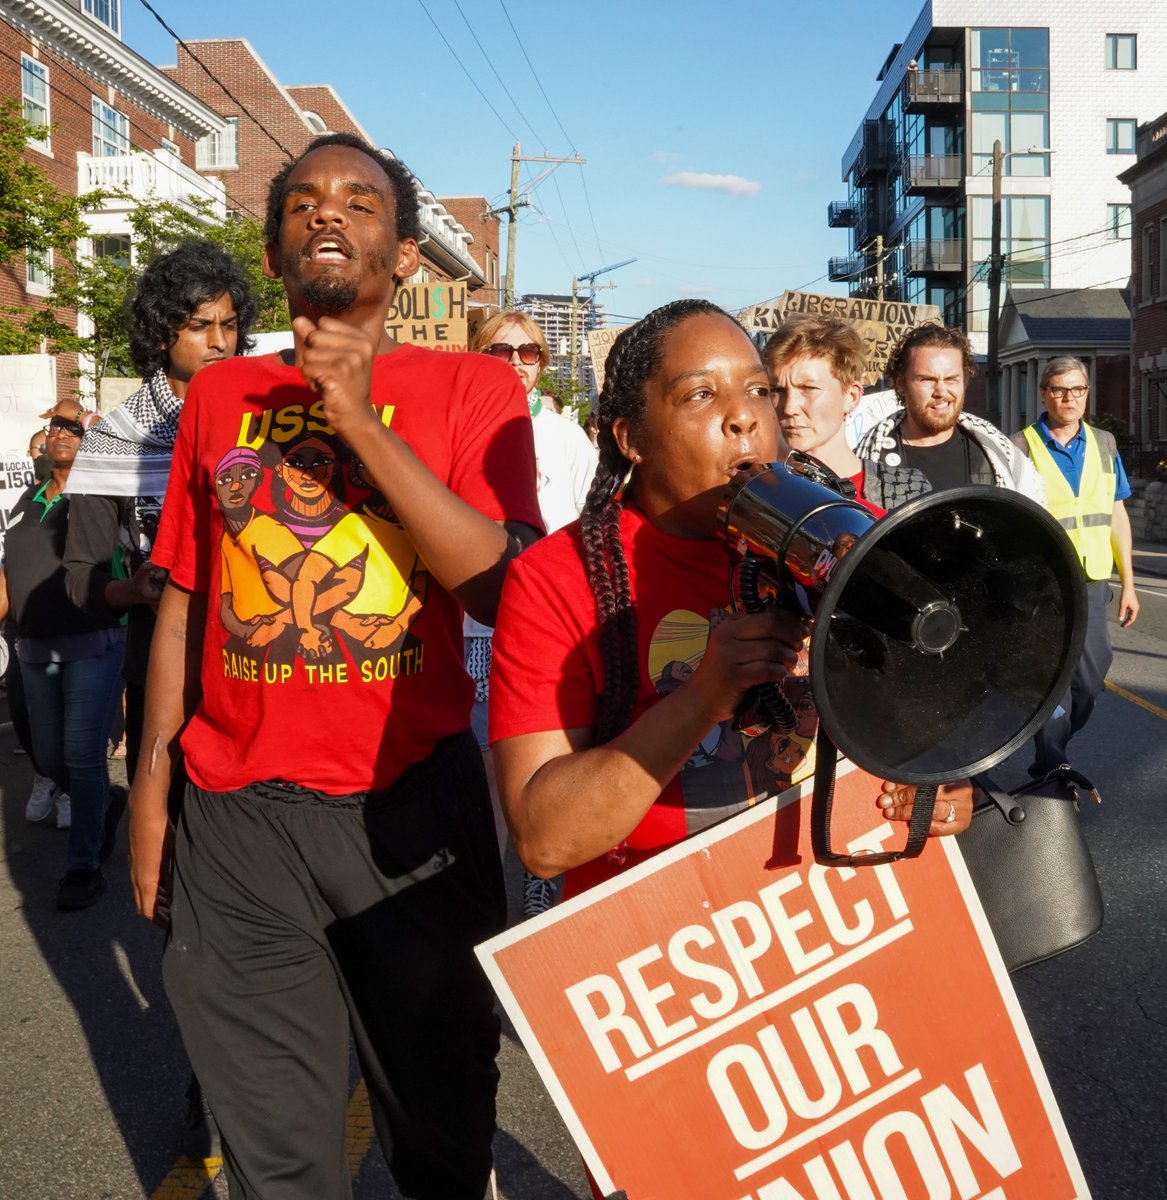 Tonight in Durham, we joined workers from across industries to celebrate May Day, a day about the worker's struggle and solidarity. We hope everyone got to feel some worker power today. 💪 #UnionsForAll #MayDay24